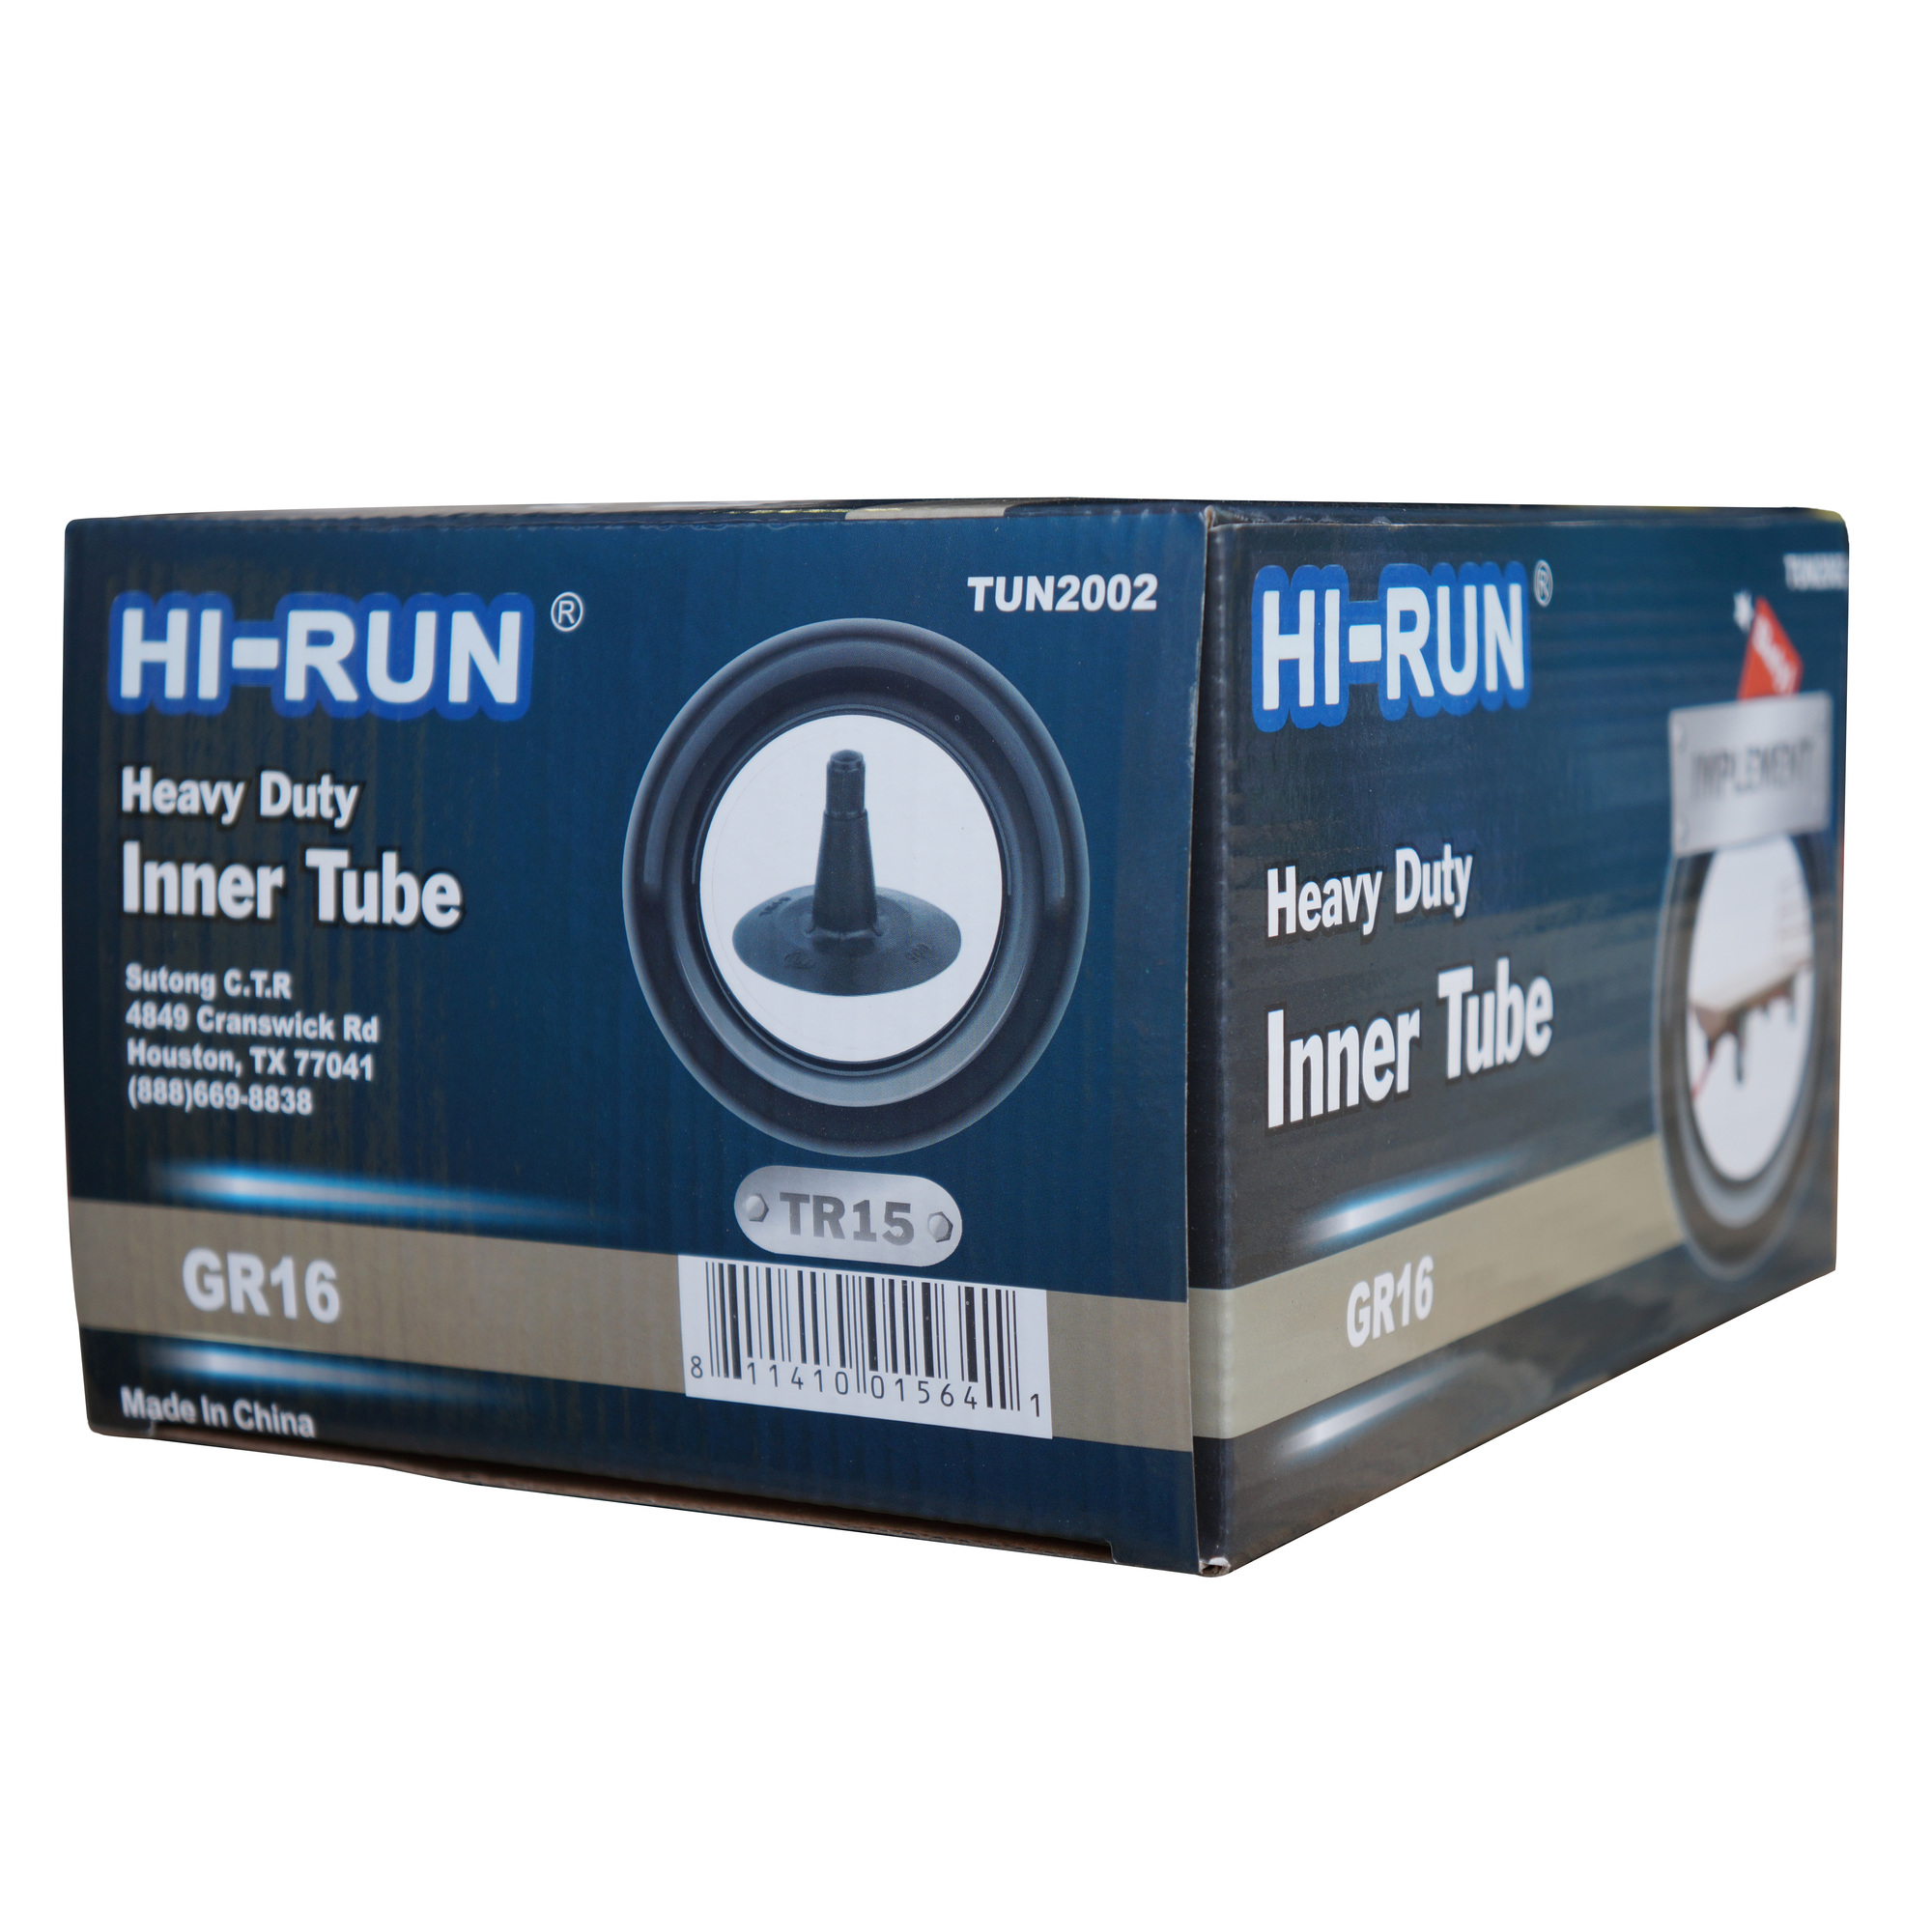 HI-RUN, Tube GR16 (TR15) Float Implement, Fits Rim Size 16 in, Included (qty.) 1 Model TUN2002